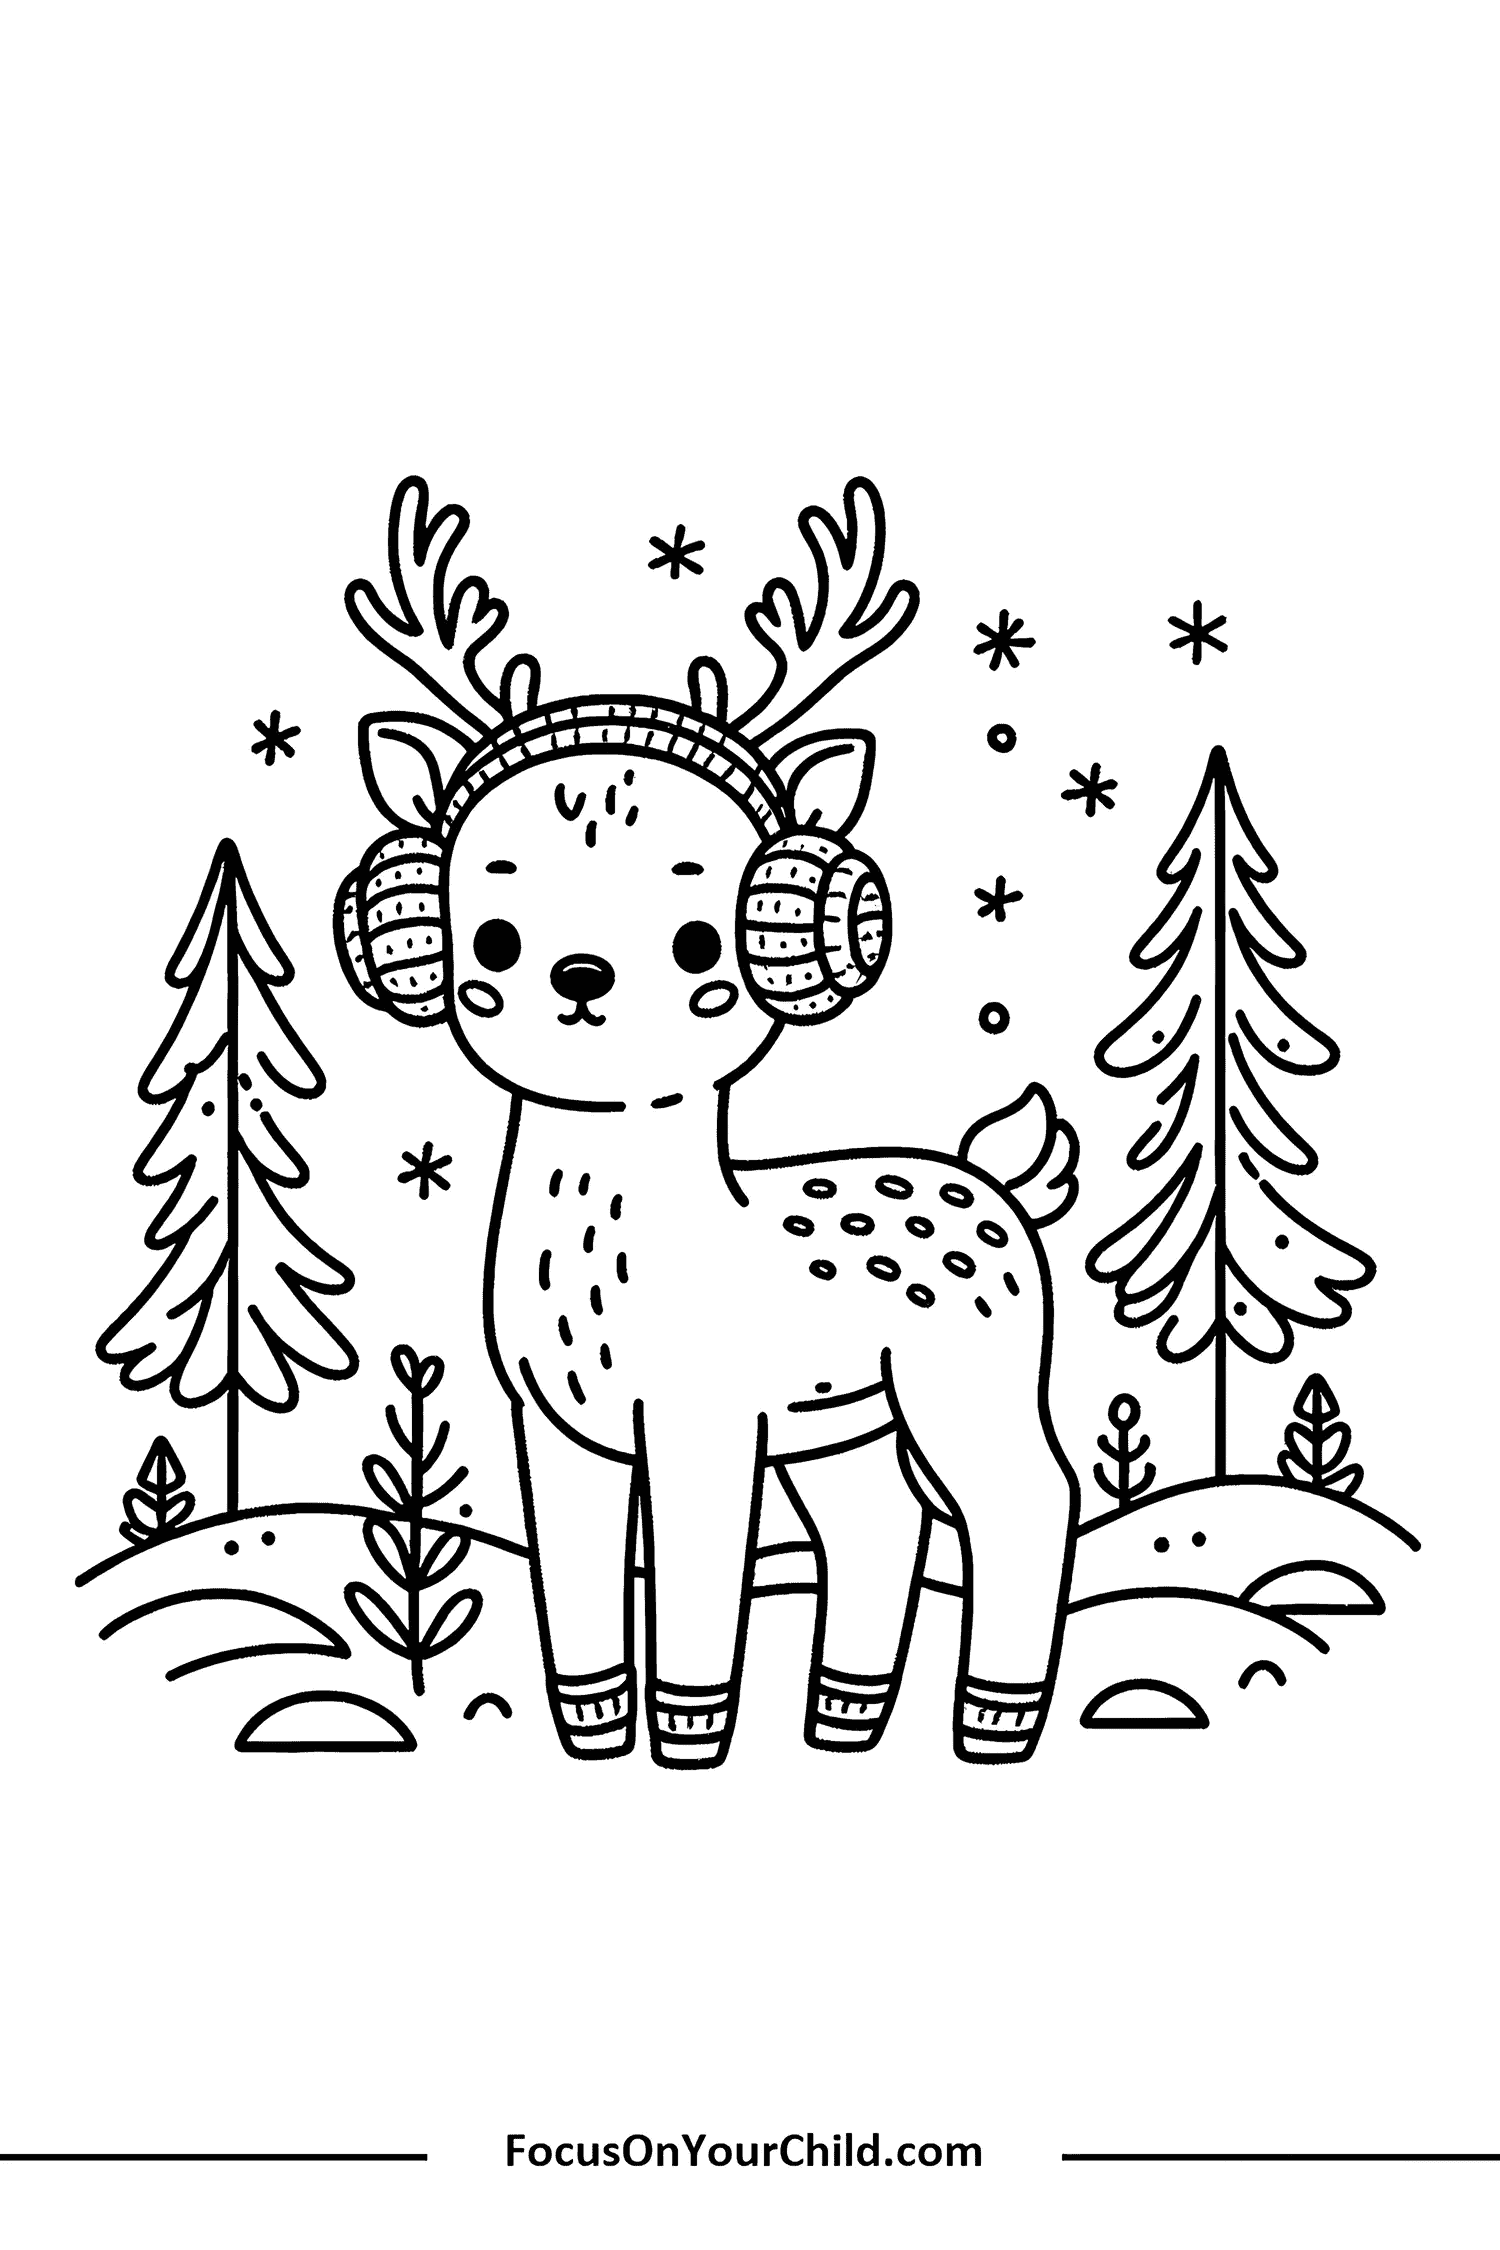 Adorable cartoon reindeer in forest setting, perfect for coloring activities.